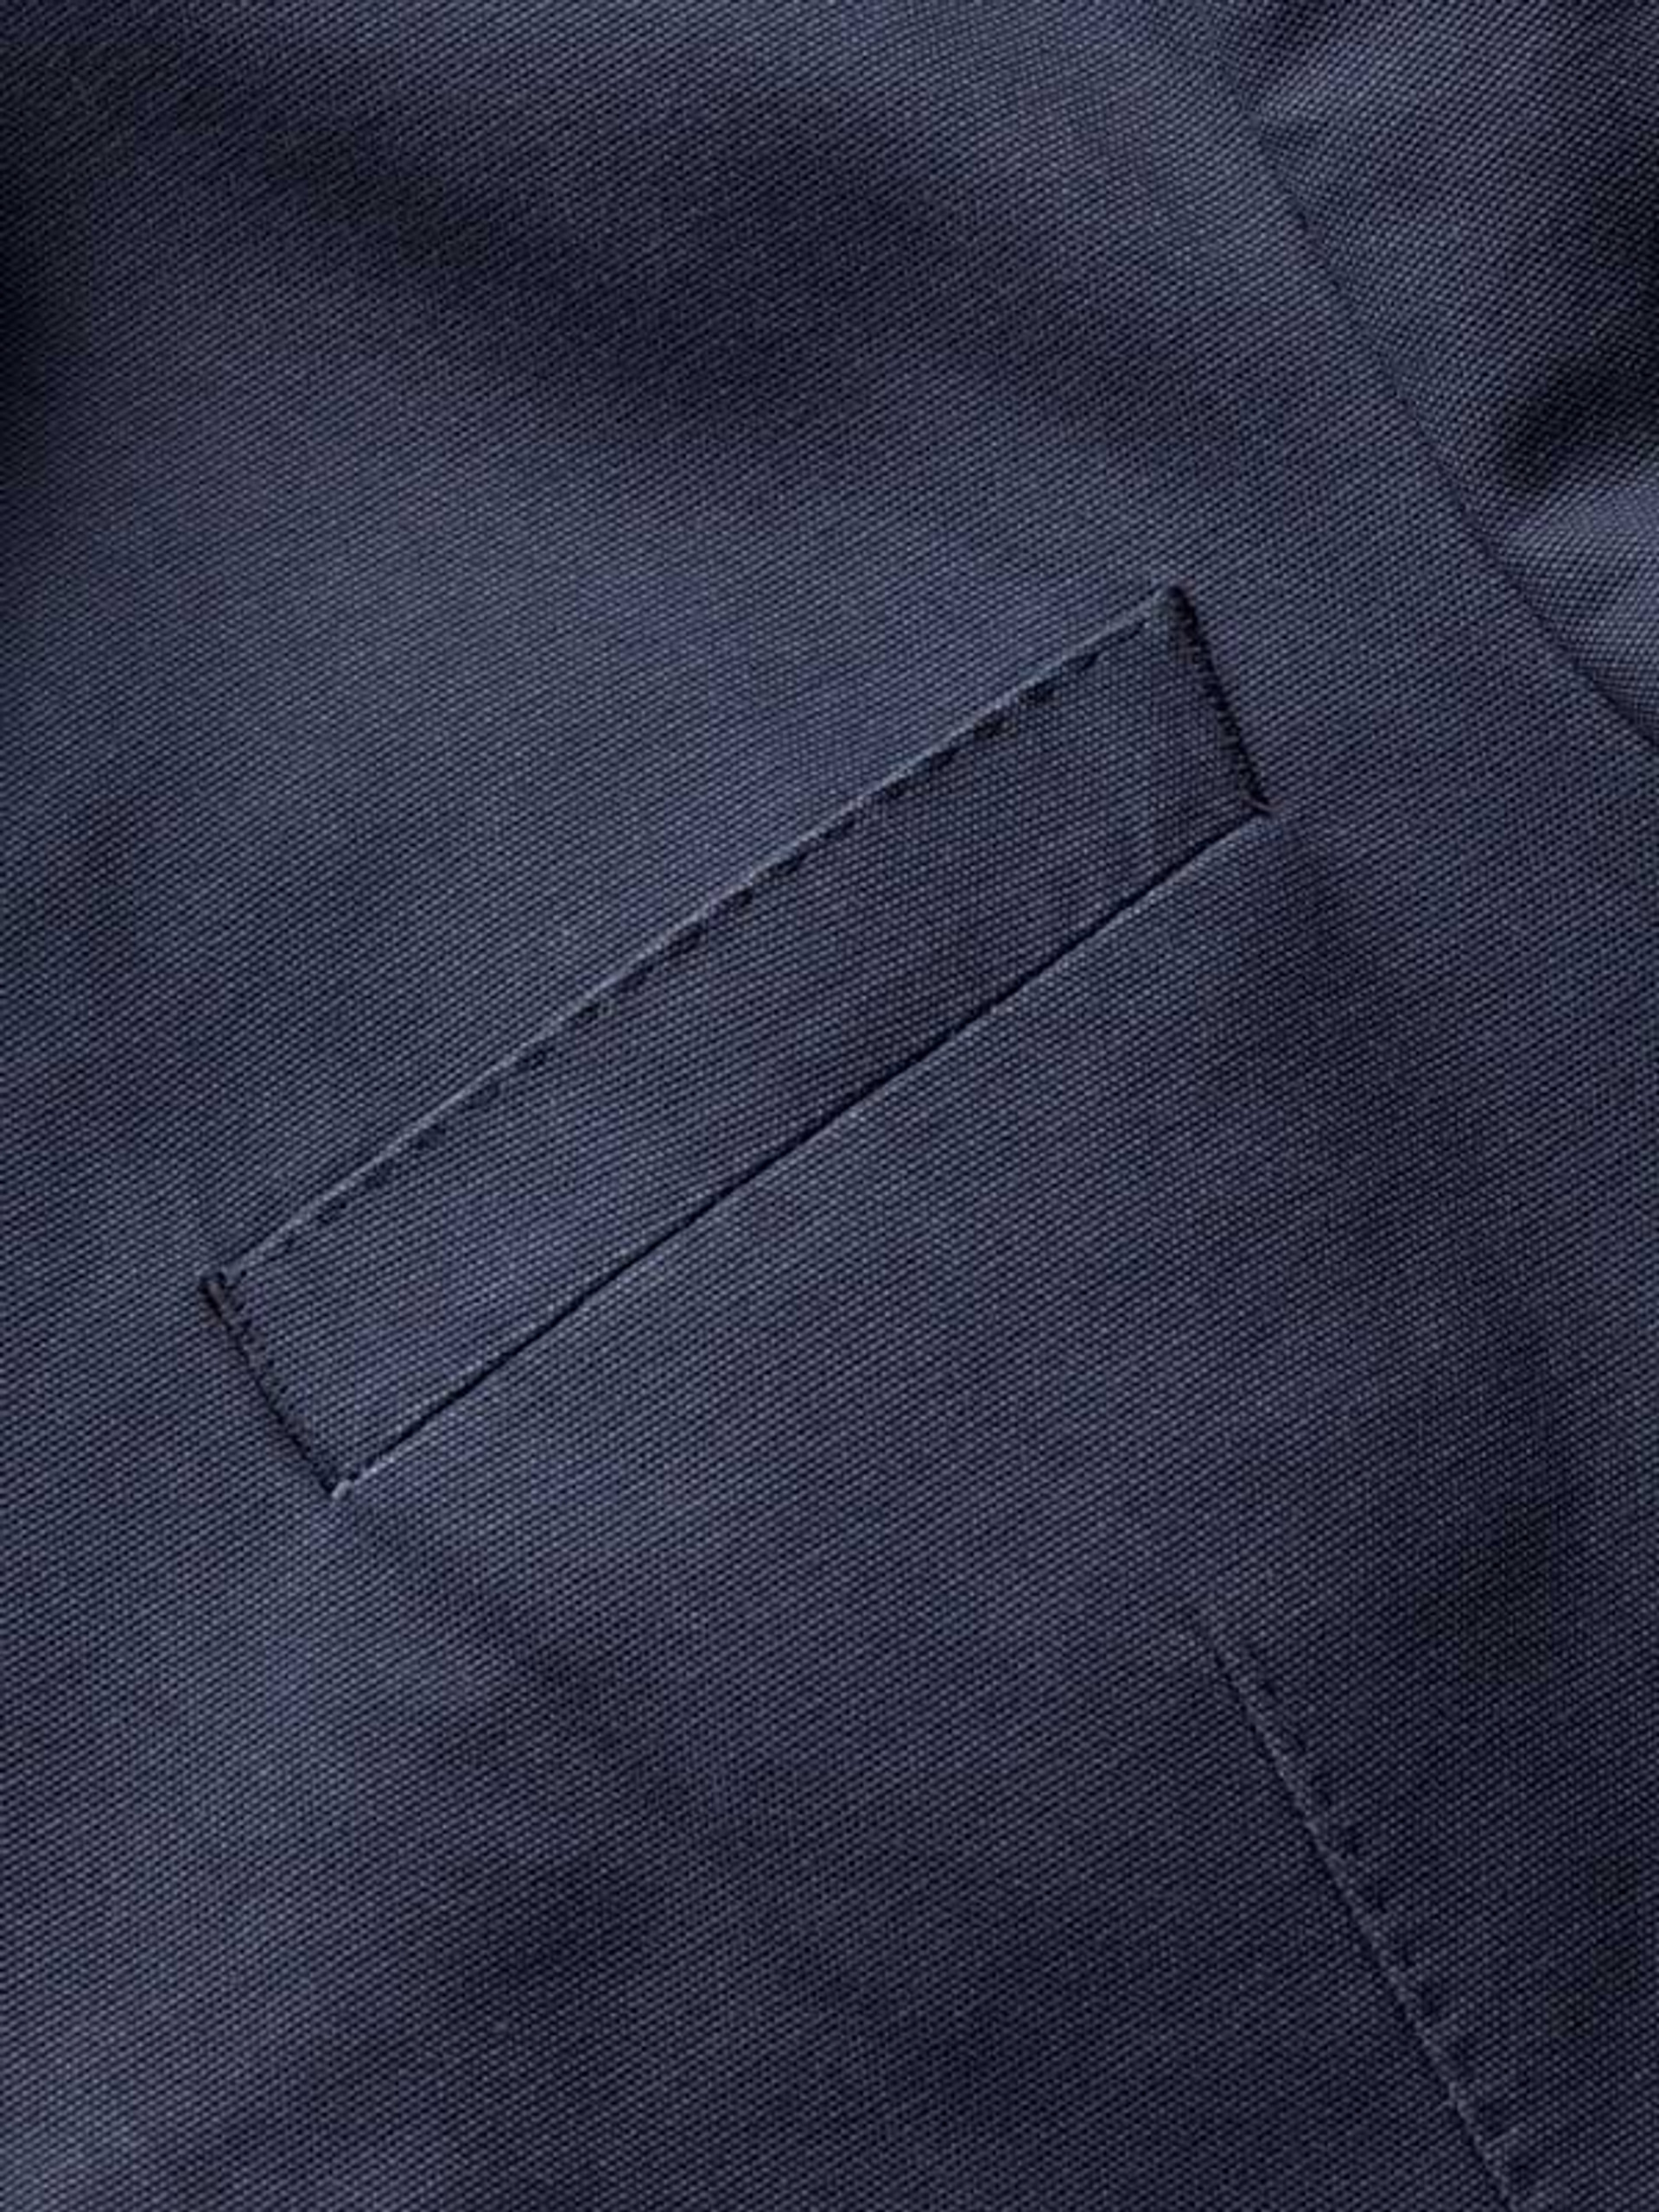 Navy Blue Washed Cotton Oxford Jacket | Peter Christian